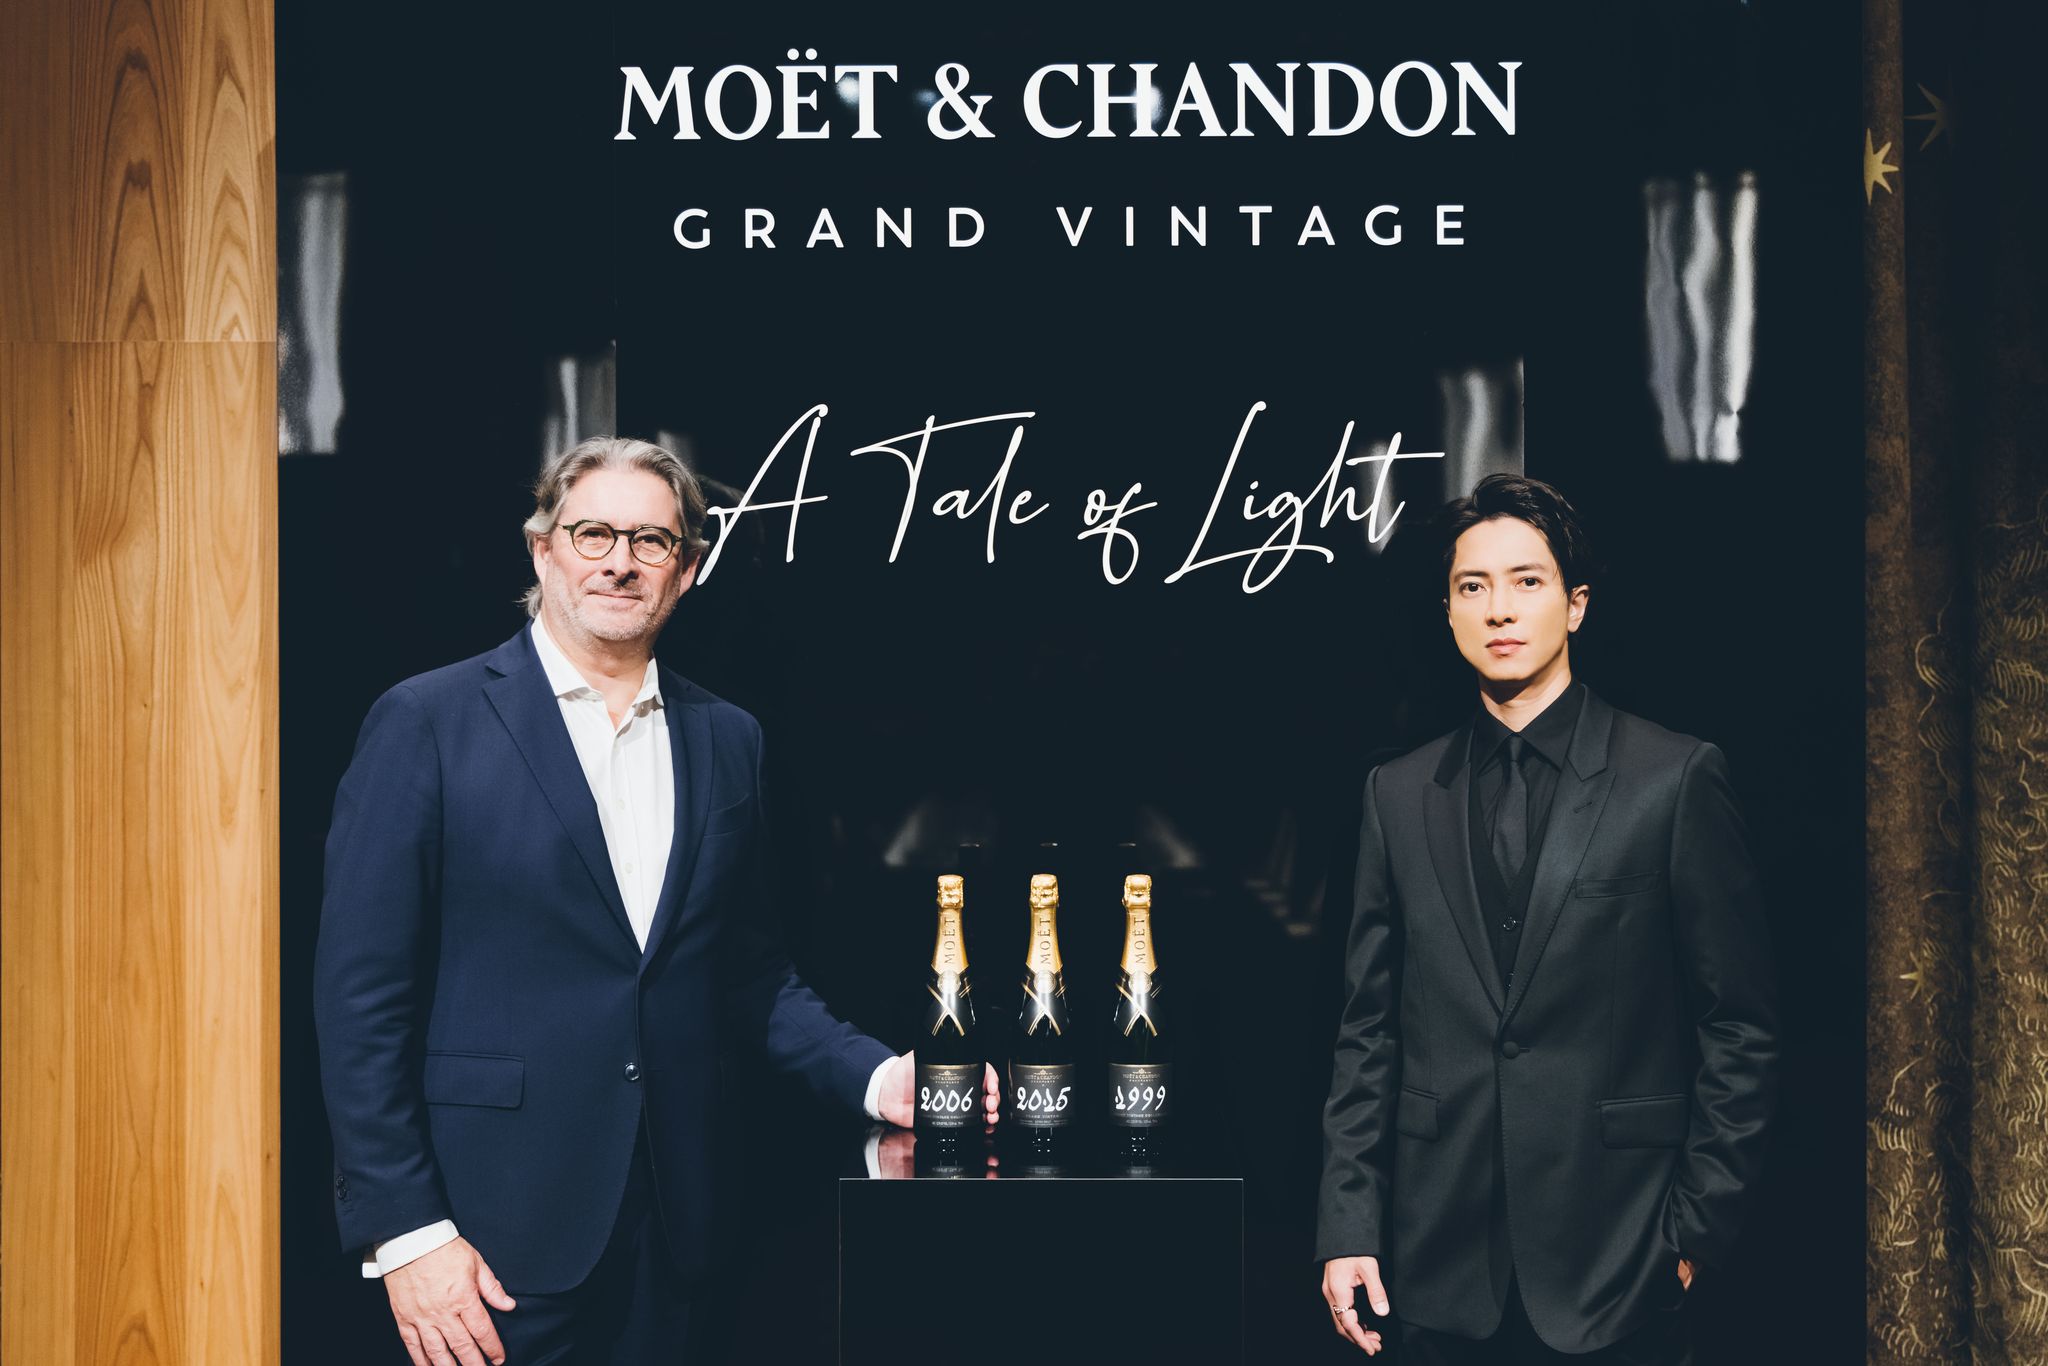 benoit goez and tomohisa yamashita standing in front of the bottles of moet et chandon grand vintage "a tales of light"